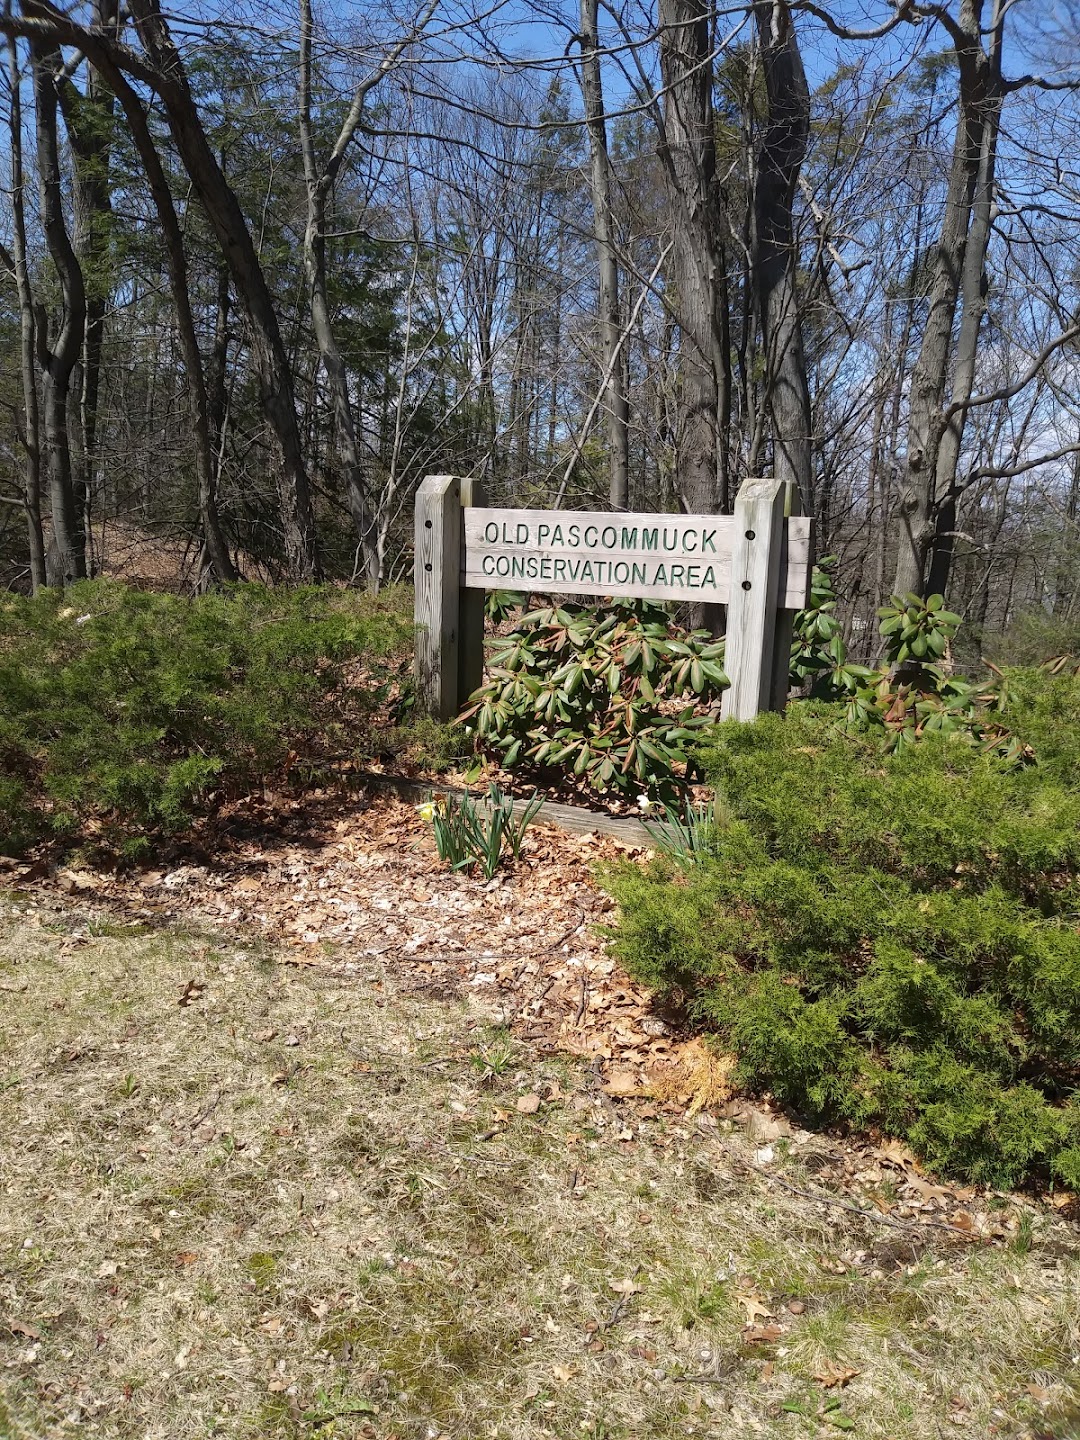 Old Pascommuck Conservation Area